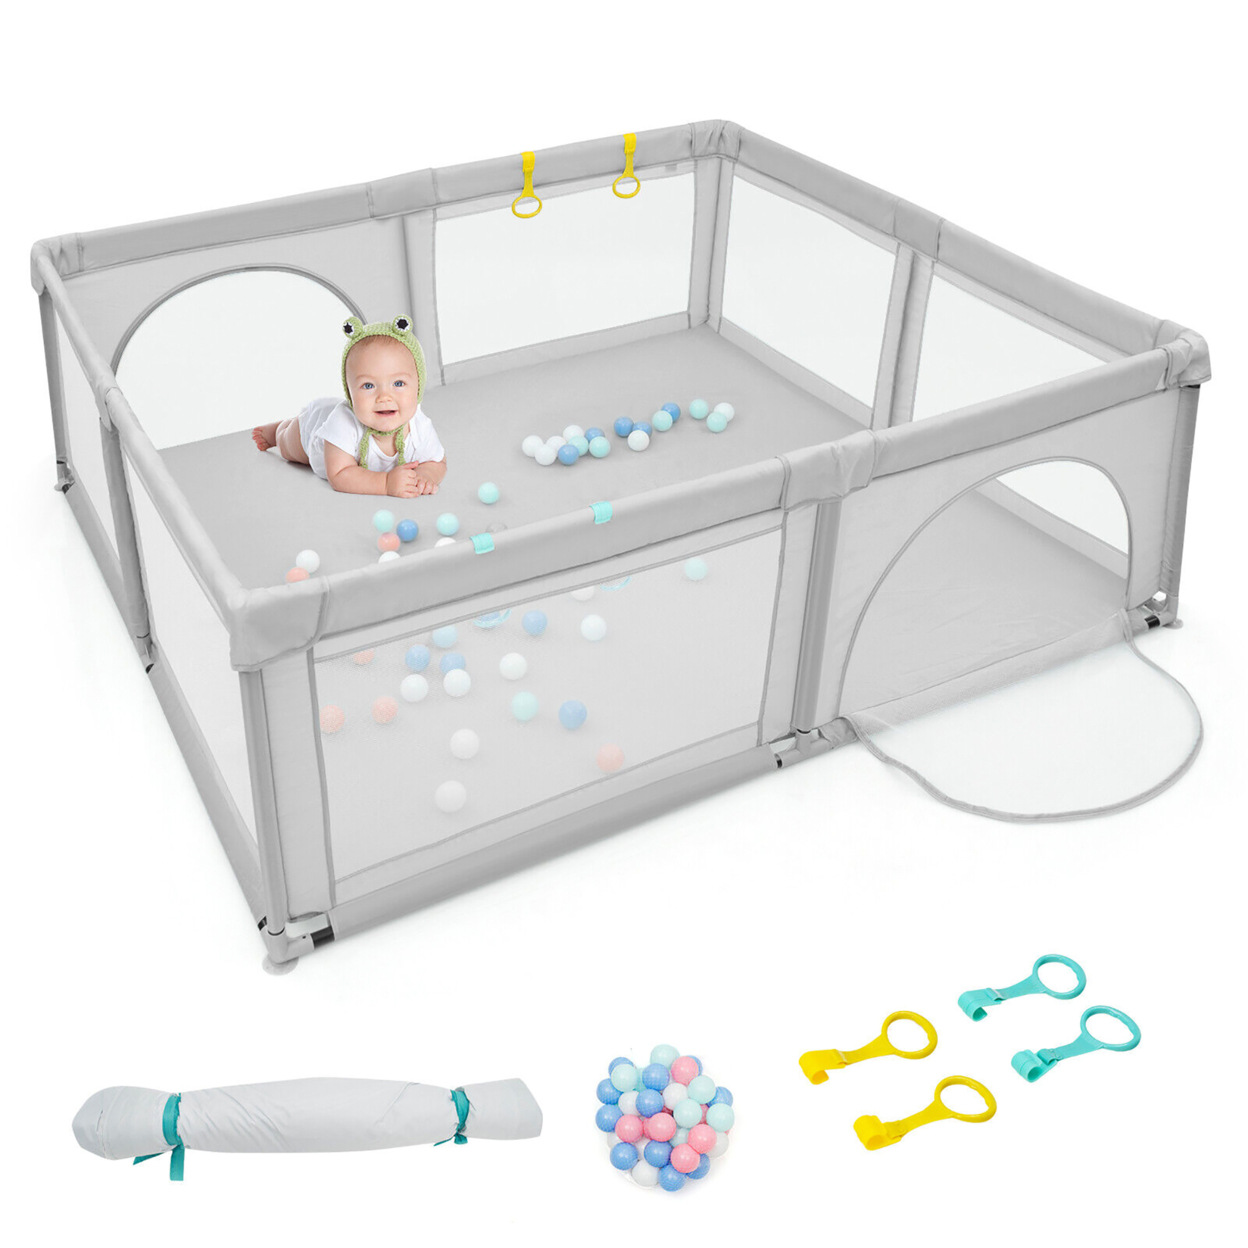 Extra Large Baby Playpen Safety Baby Play Yard W/ 50 Ocean Balls & 4 Handles - Blue